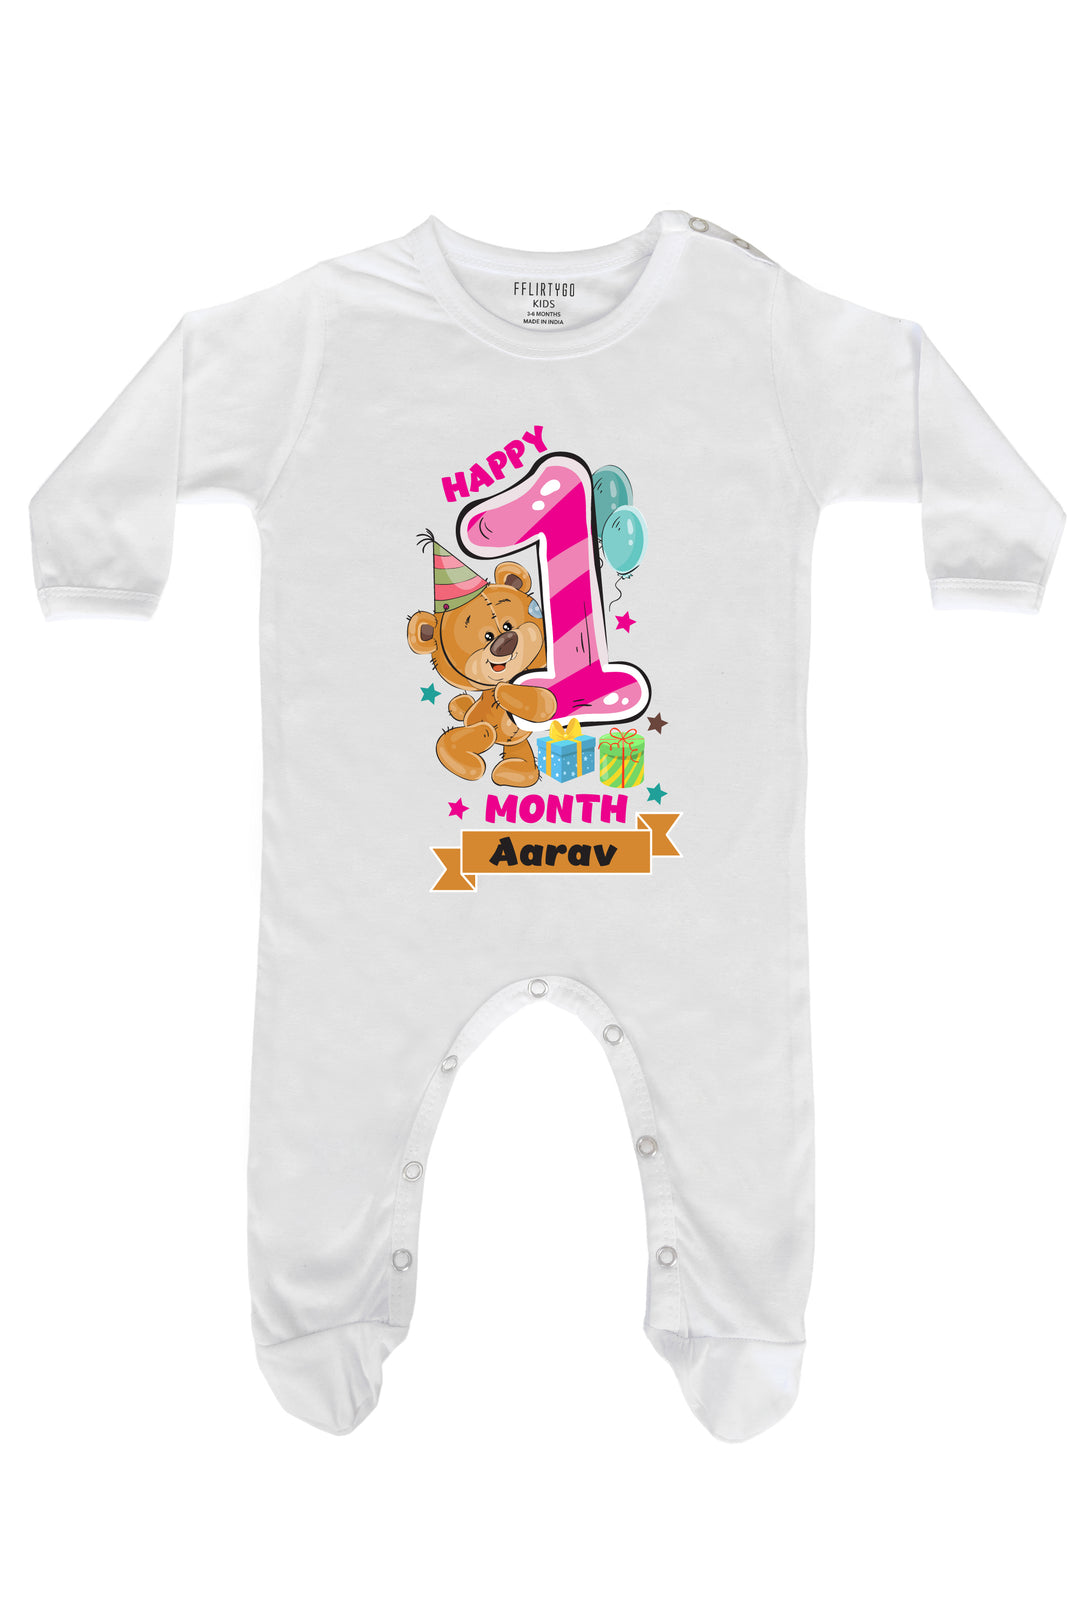 Discover our charming collection of onesies and baby rompers at Fflirtygo. From adorable baby rompers and unisex newborn onesies to the best onesies for newborns, find the perfect white romper or cute newborn jumpsuit. Shop now for 0-3 month options and adorable new born babysuits!